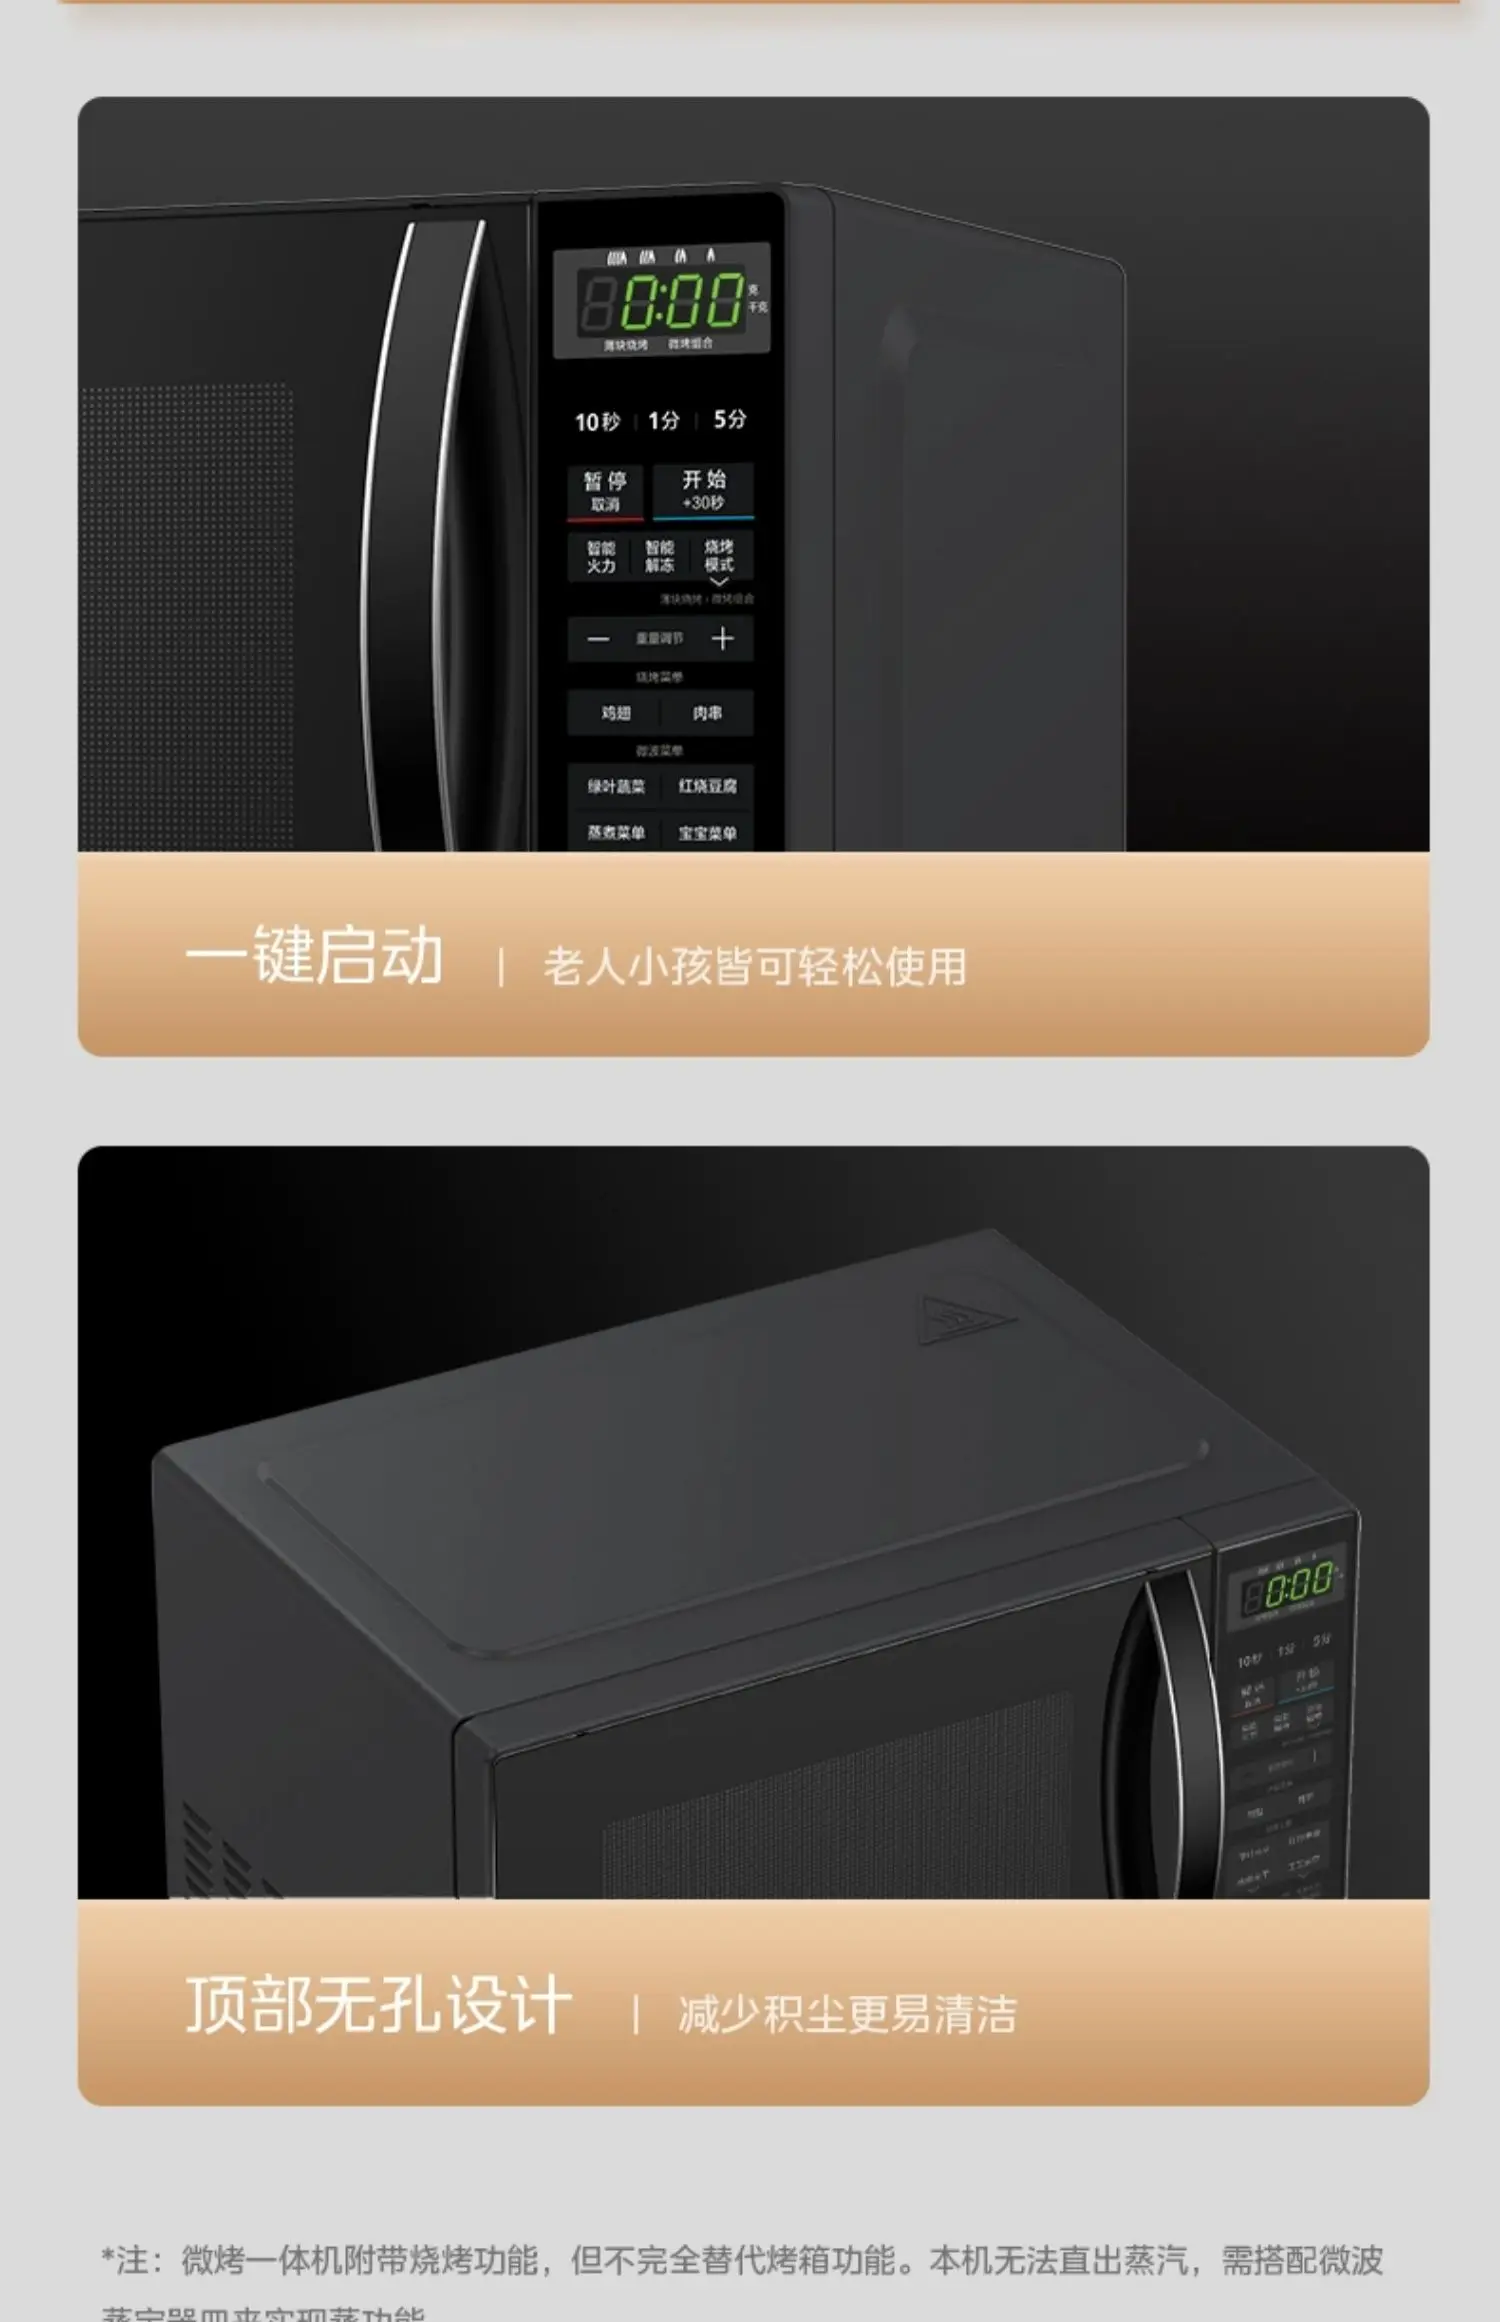 New Mini Oven Microwave Oven L201B 20L Convection Oven Sterilization  Function Flat Intelligent Micro-bake Integration 오븐 - AliExpress